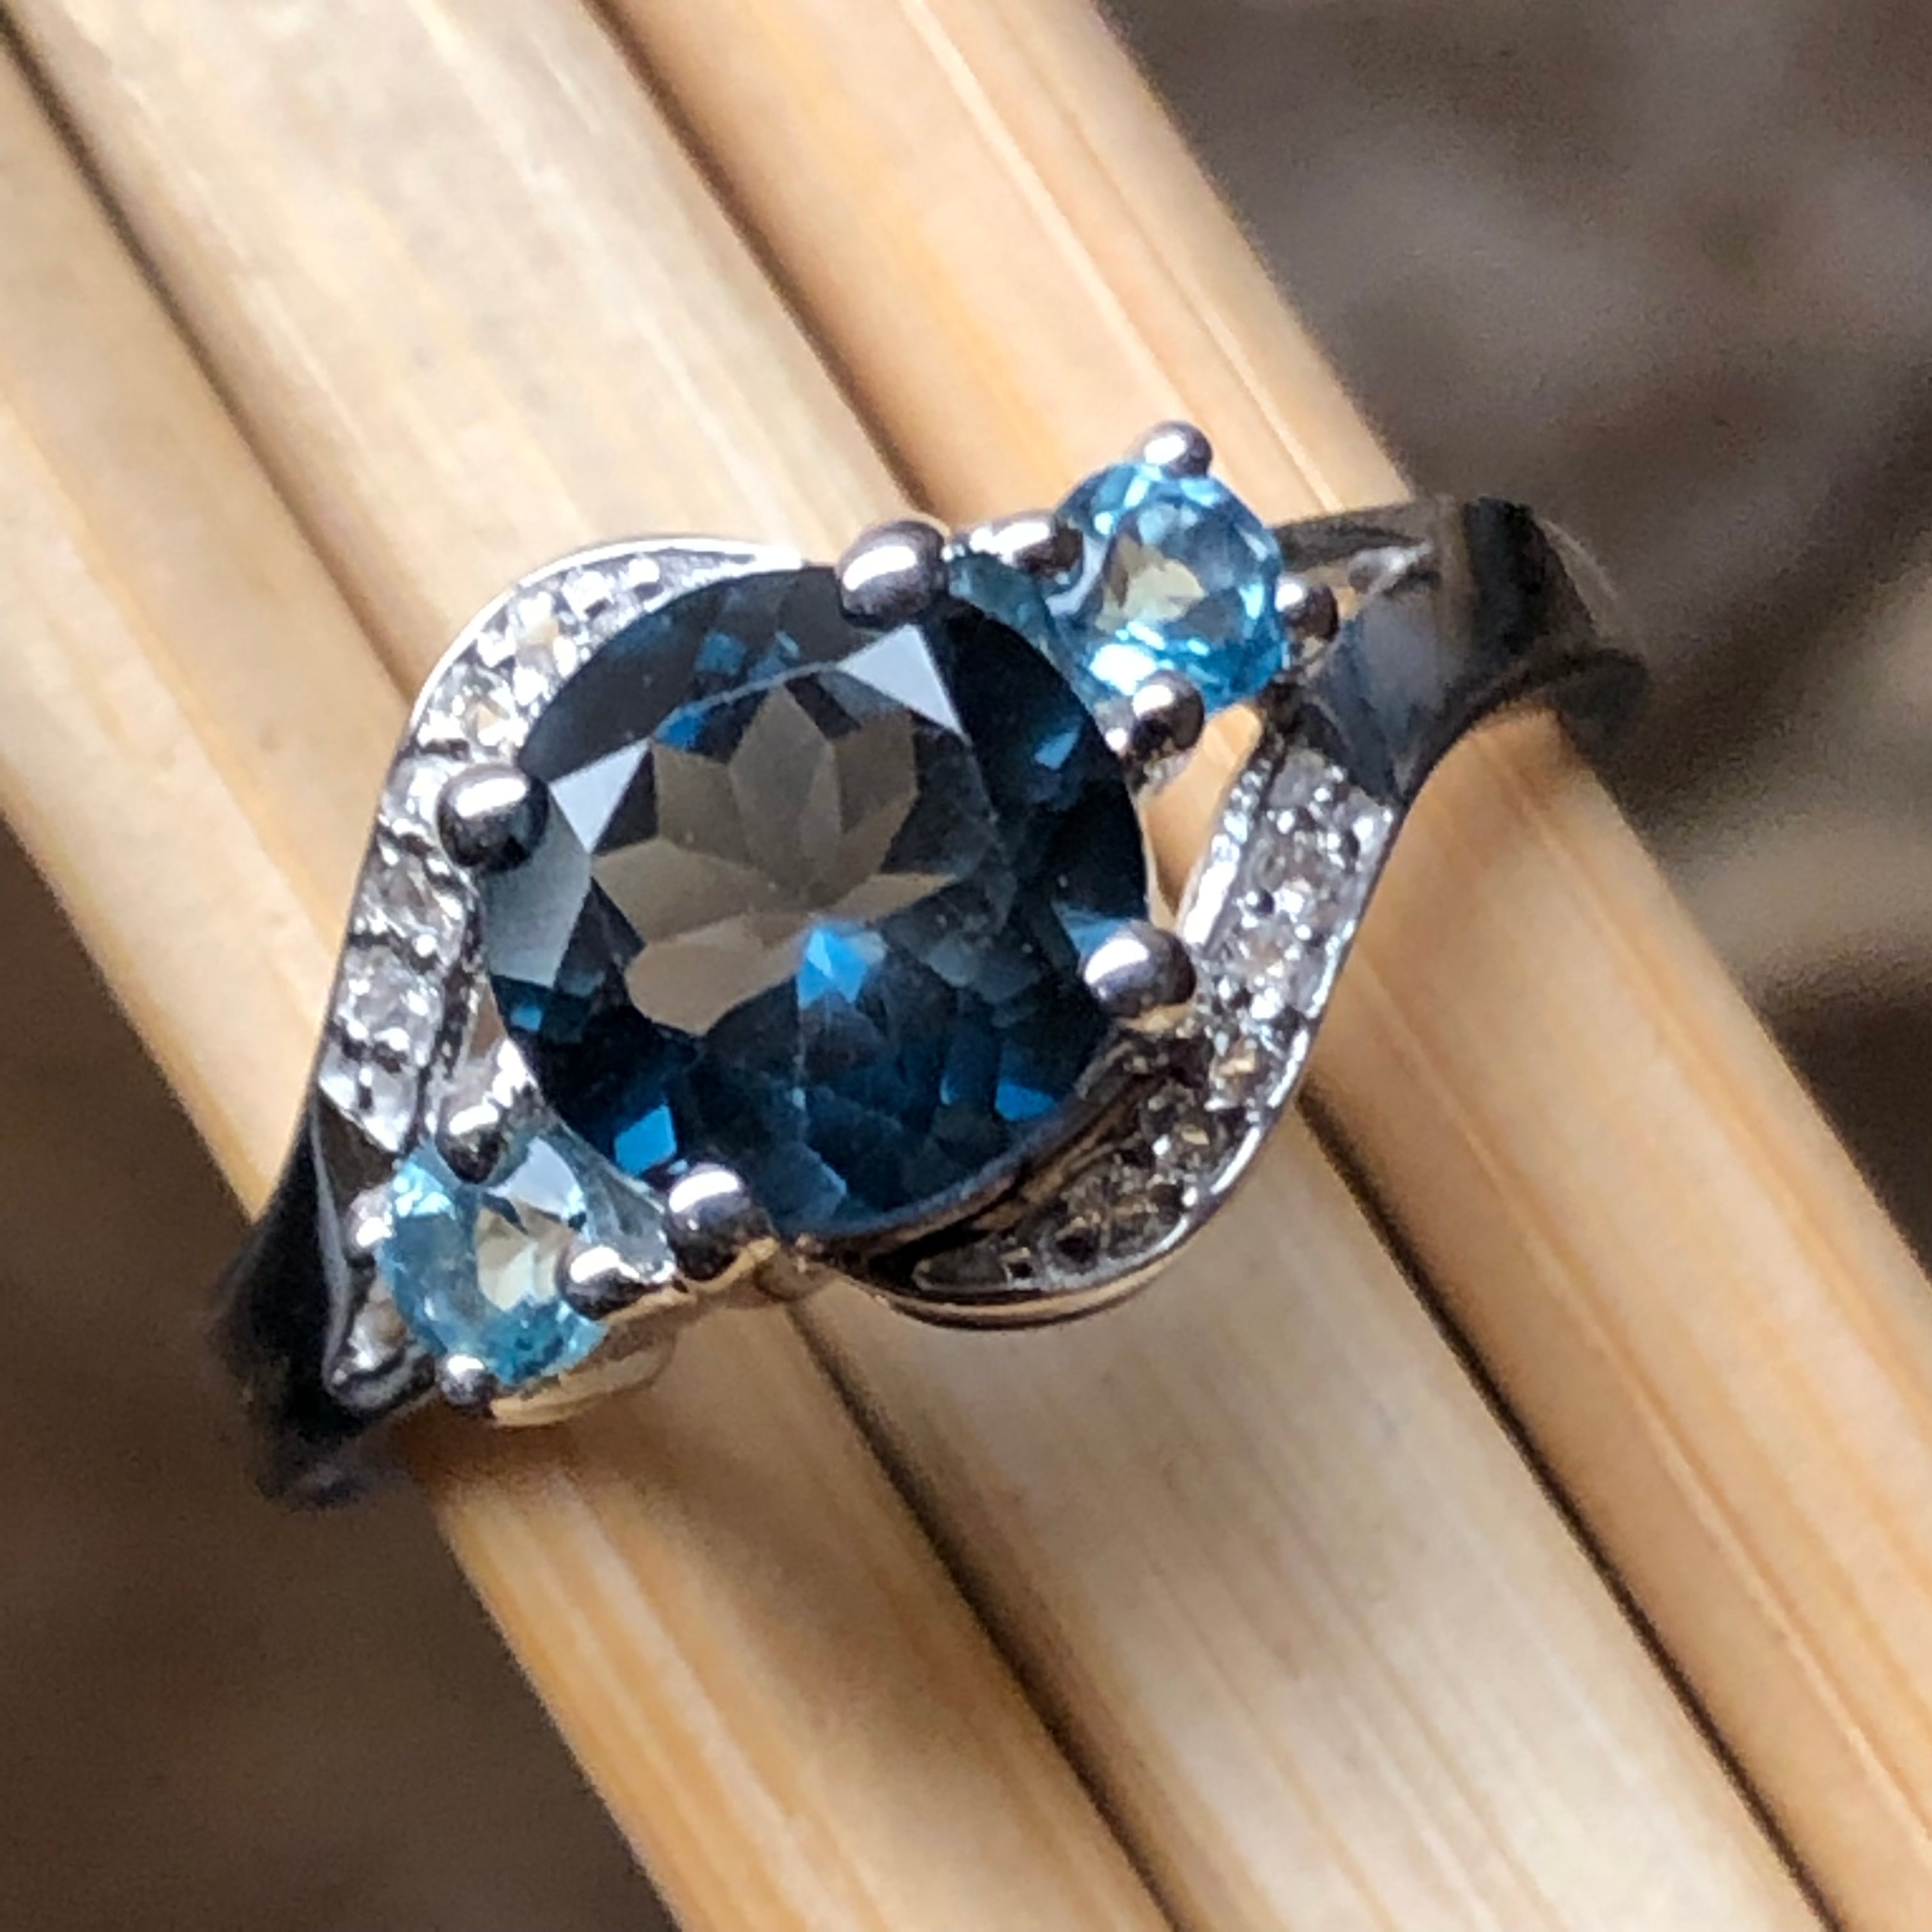 Natural 2ct London Blue Topaz, White Topaz 925 Solid Sterling Silver Engagement Ring Size 5, 6, 7, 8, 9 - Natural Rocks by Kala